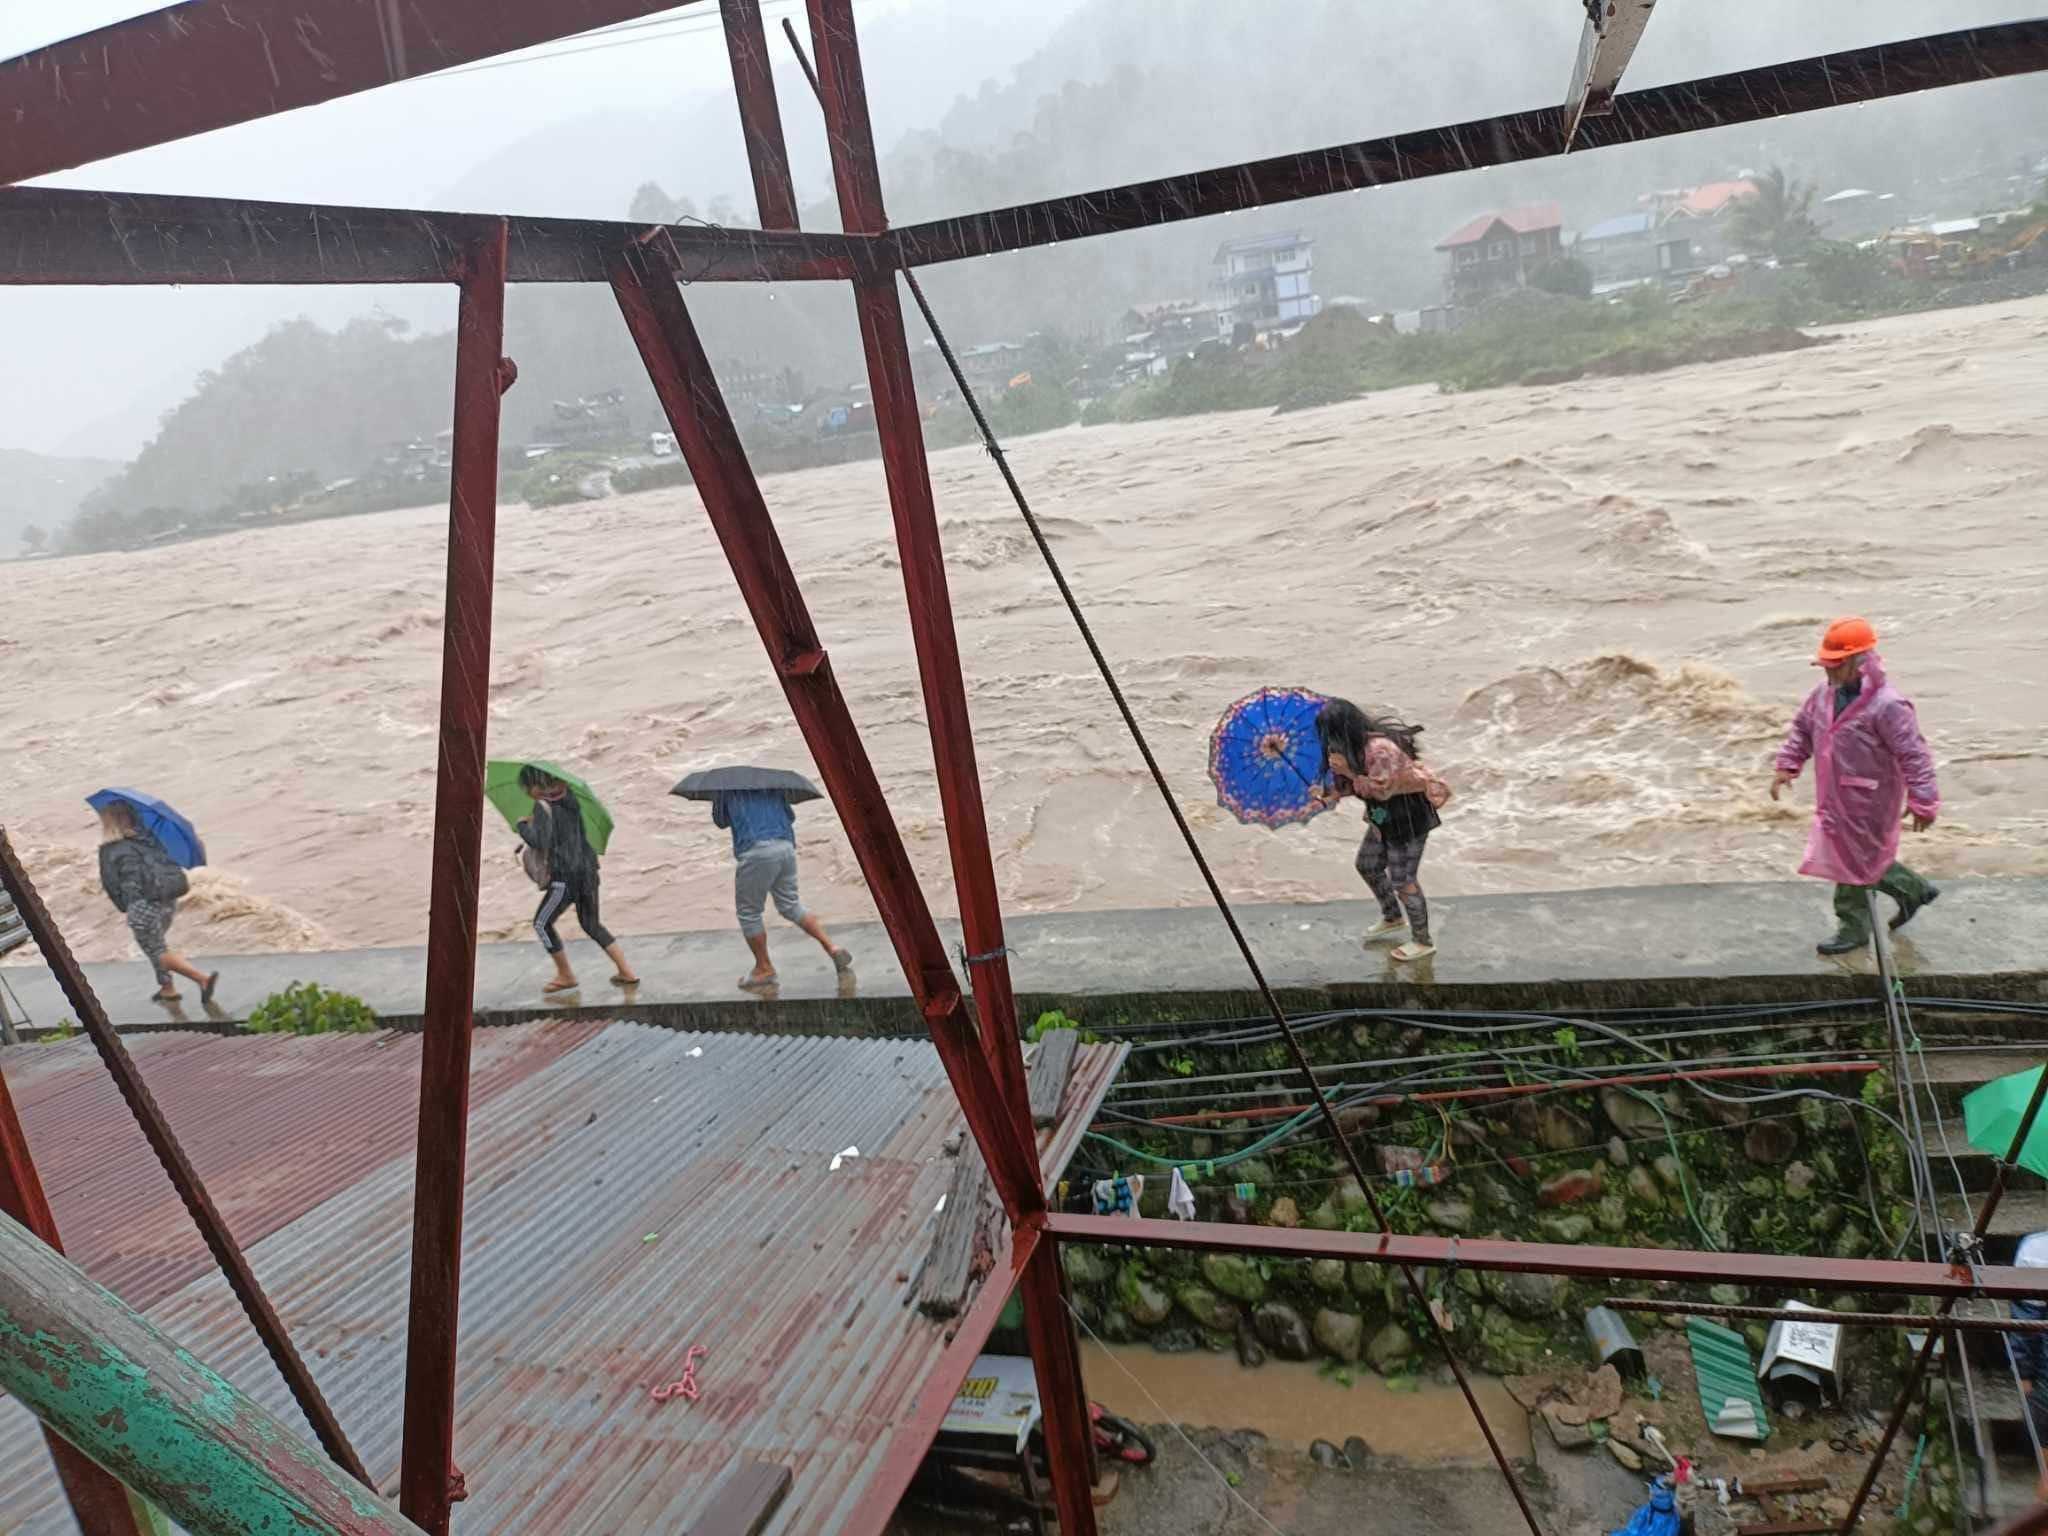 14 casualties recorded due to Egay, Habagat — NDRRMC